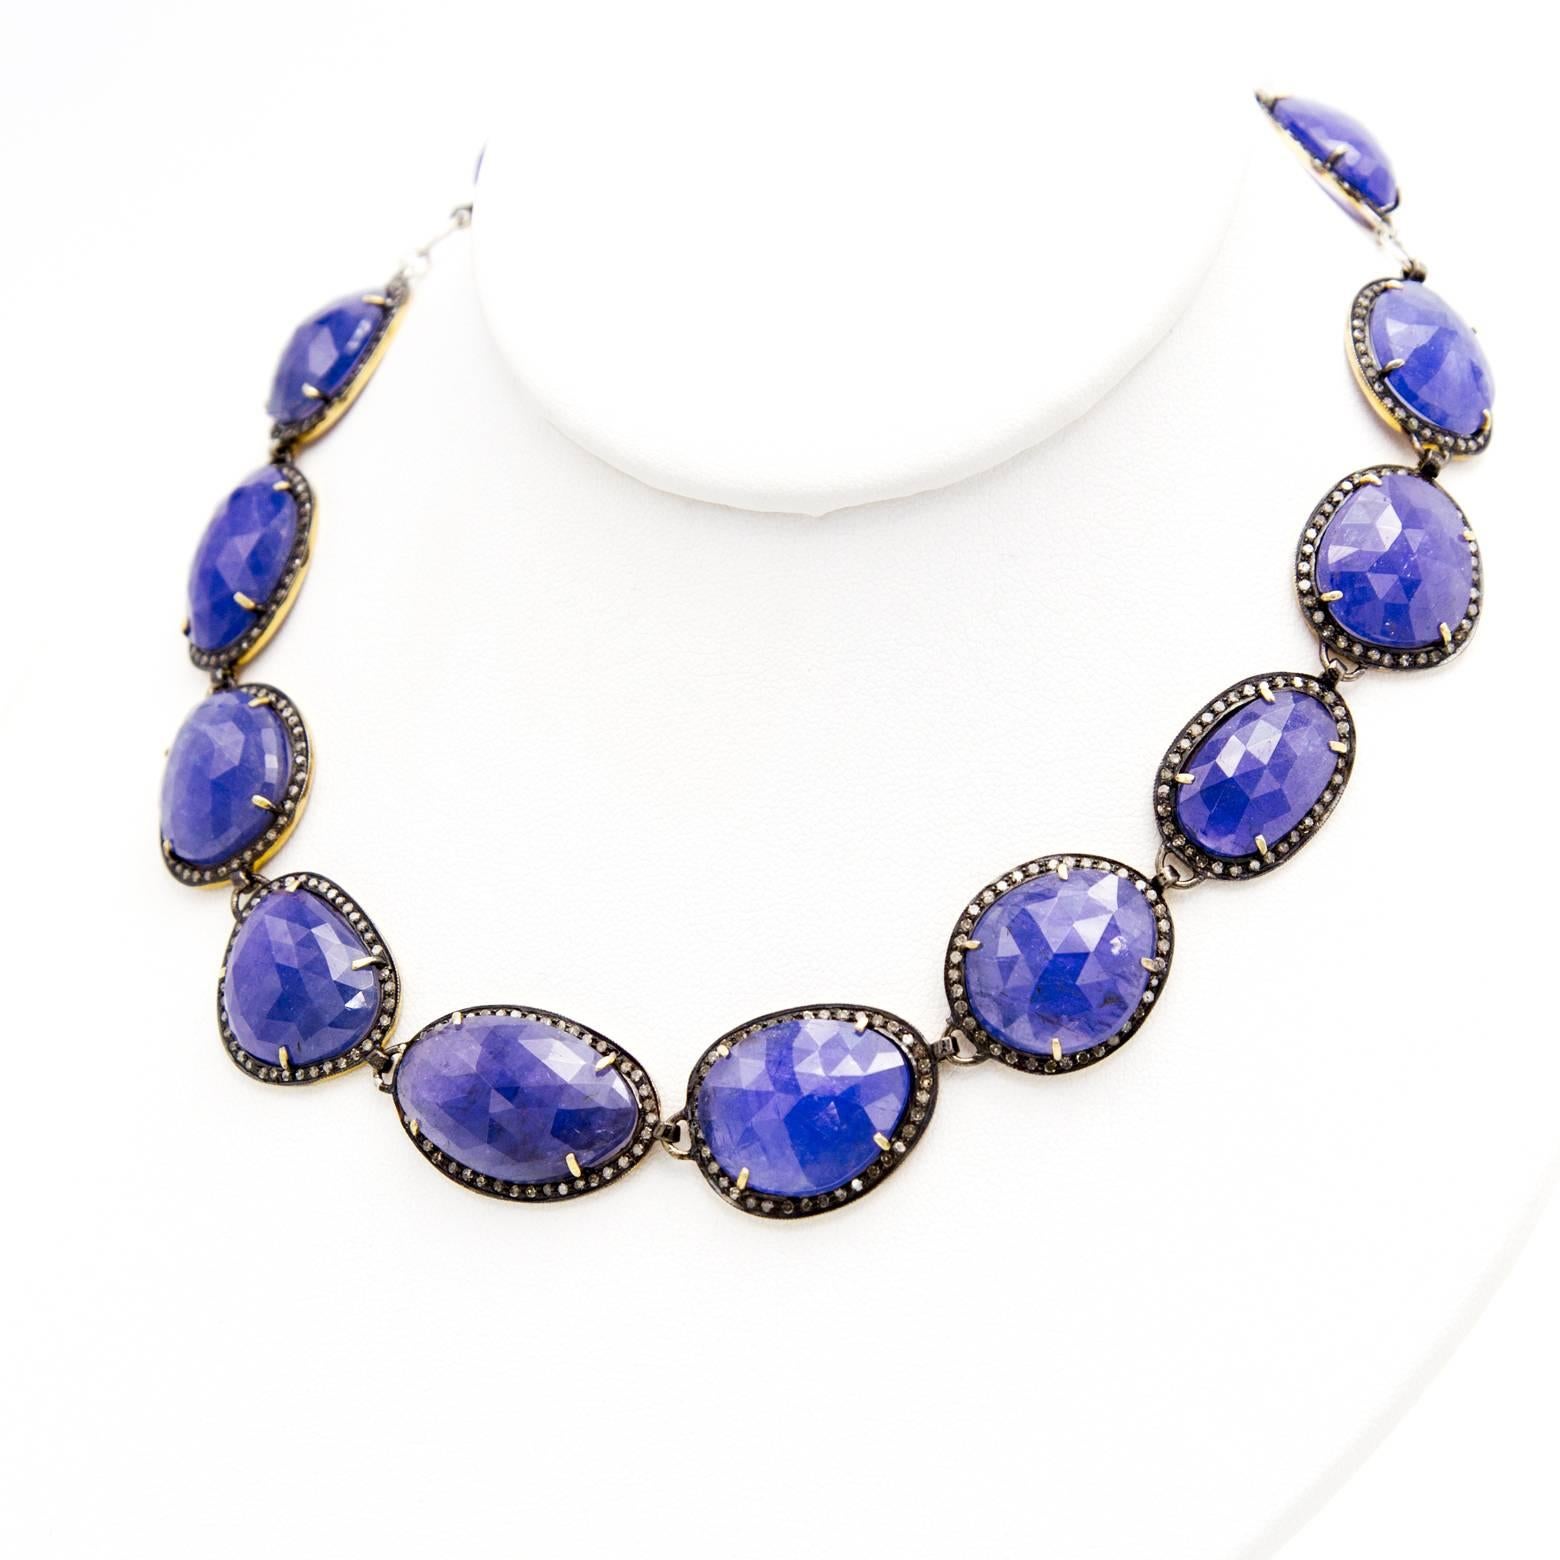 Large gorgeous tanzanites in many different varied shapes adorned with diamonds in a complimentary black oxidized sterling silver bezel. The tanzanites glow in their deep shade of purplish blue as if mined from the deep majestic ocean. Let yourself